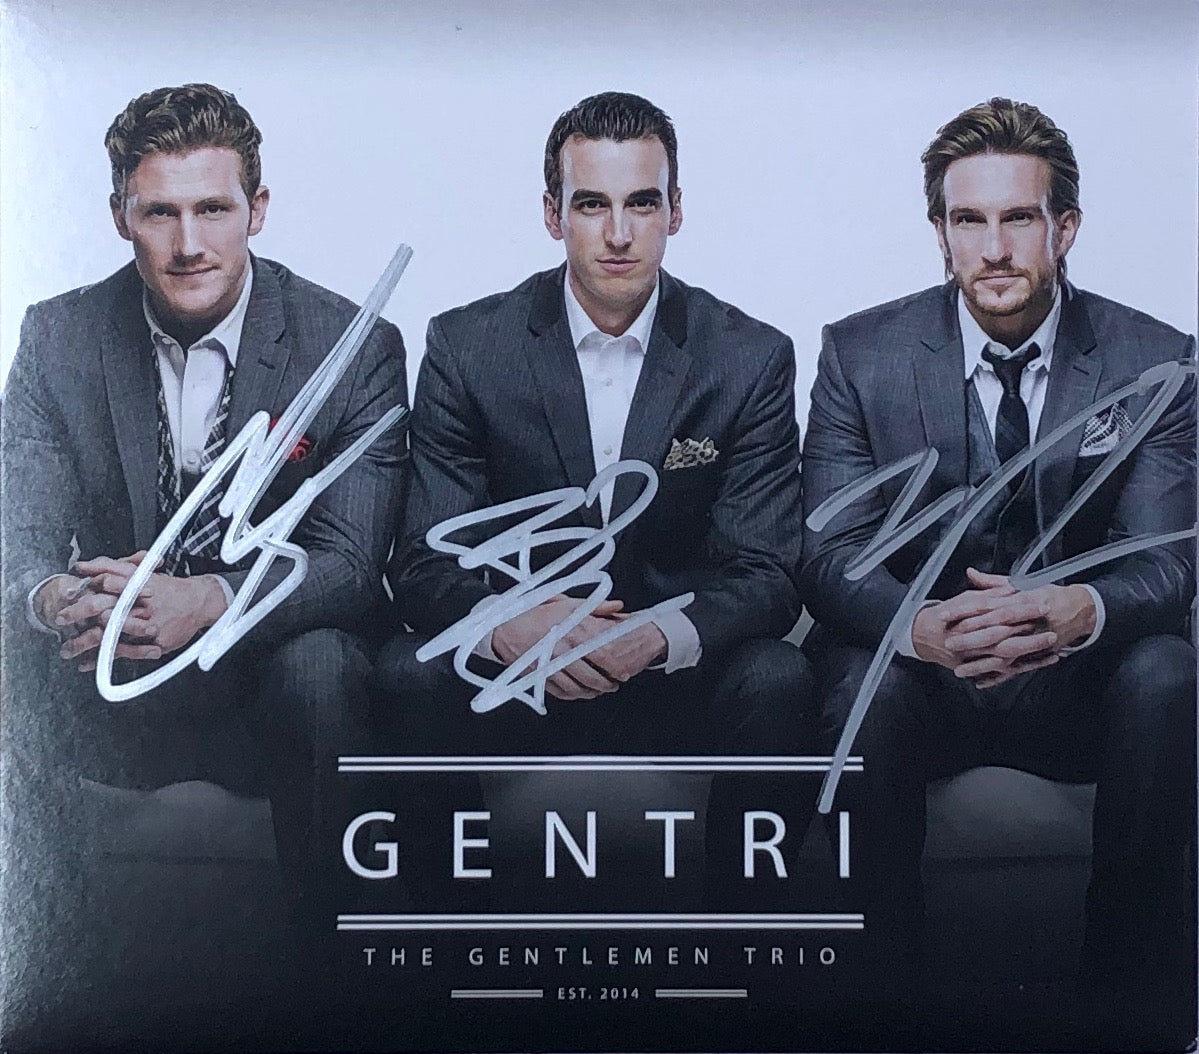 Autographed GENTRI - The Gentlemen Trio CD - Limited Edition